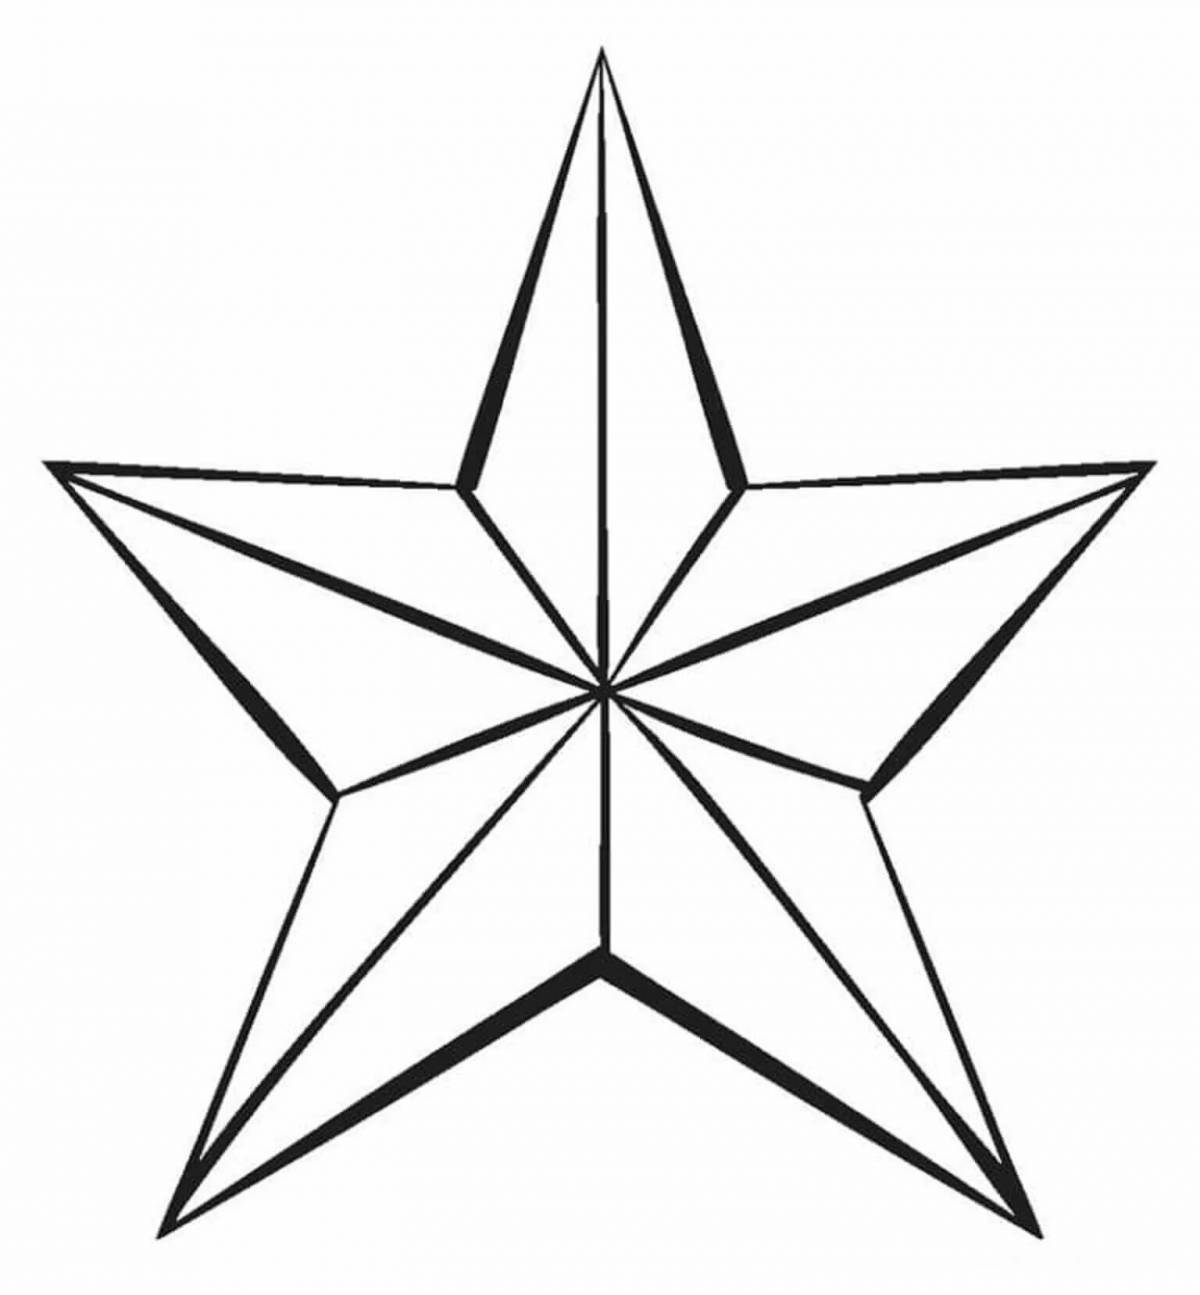 Comic coloring picture of a star